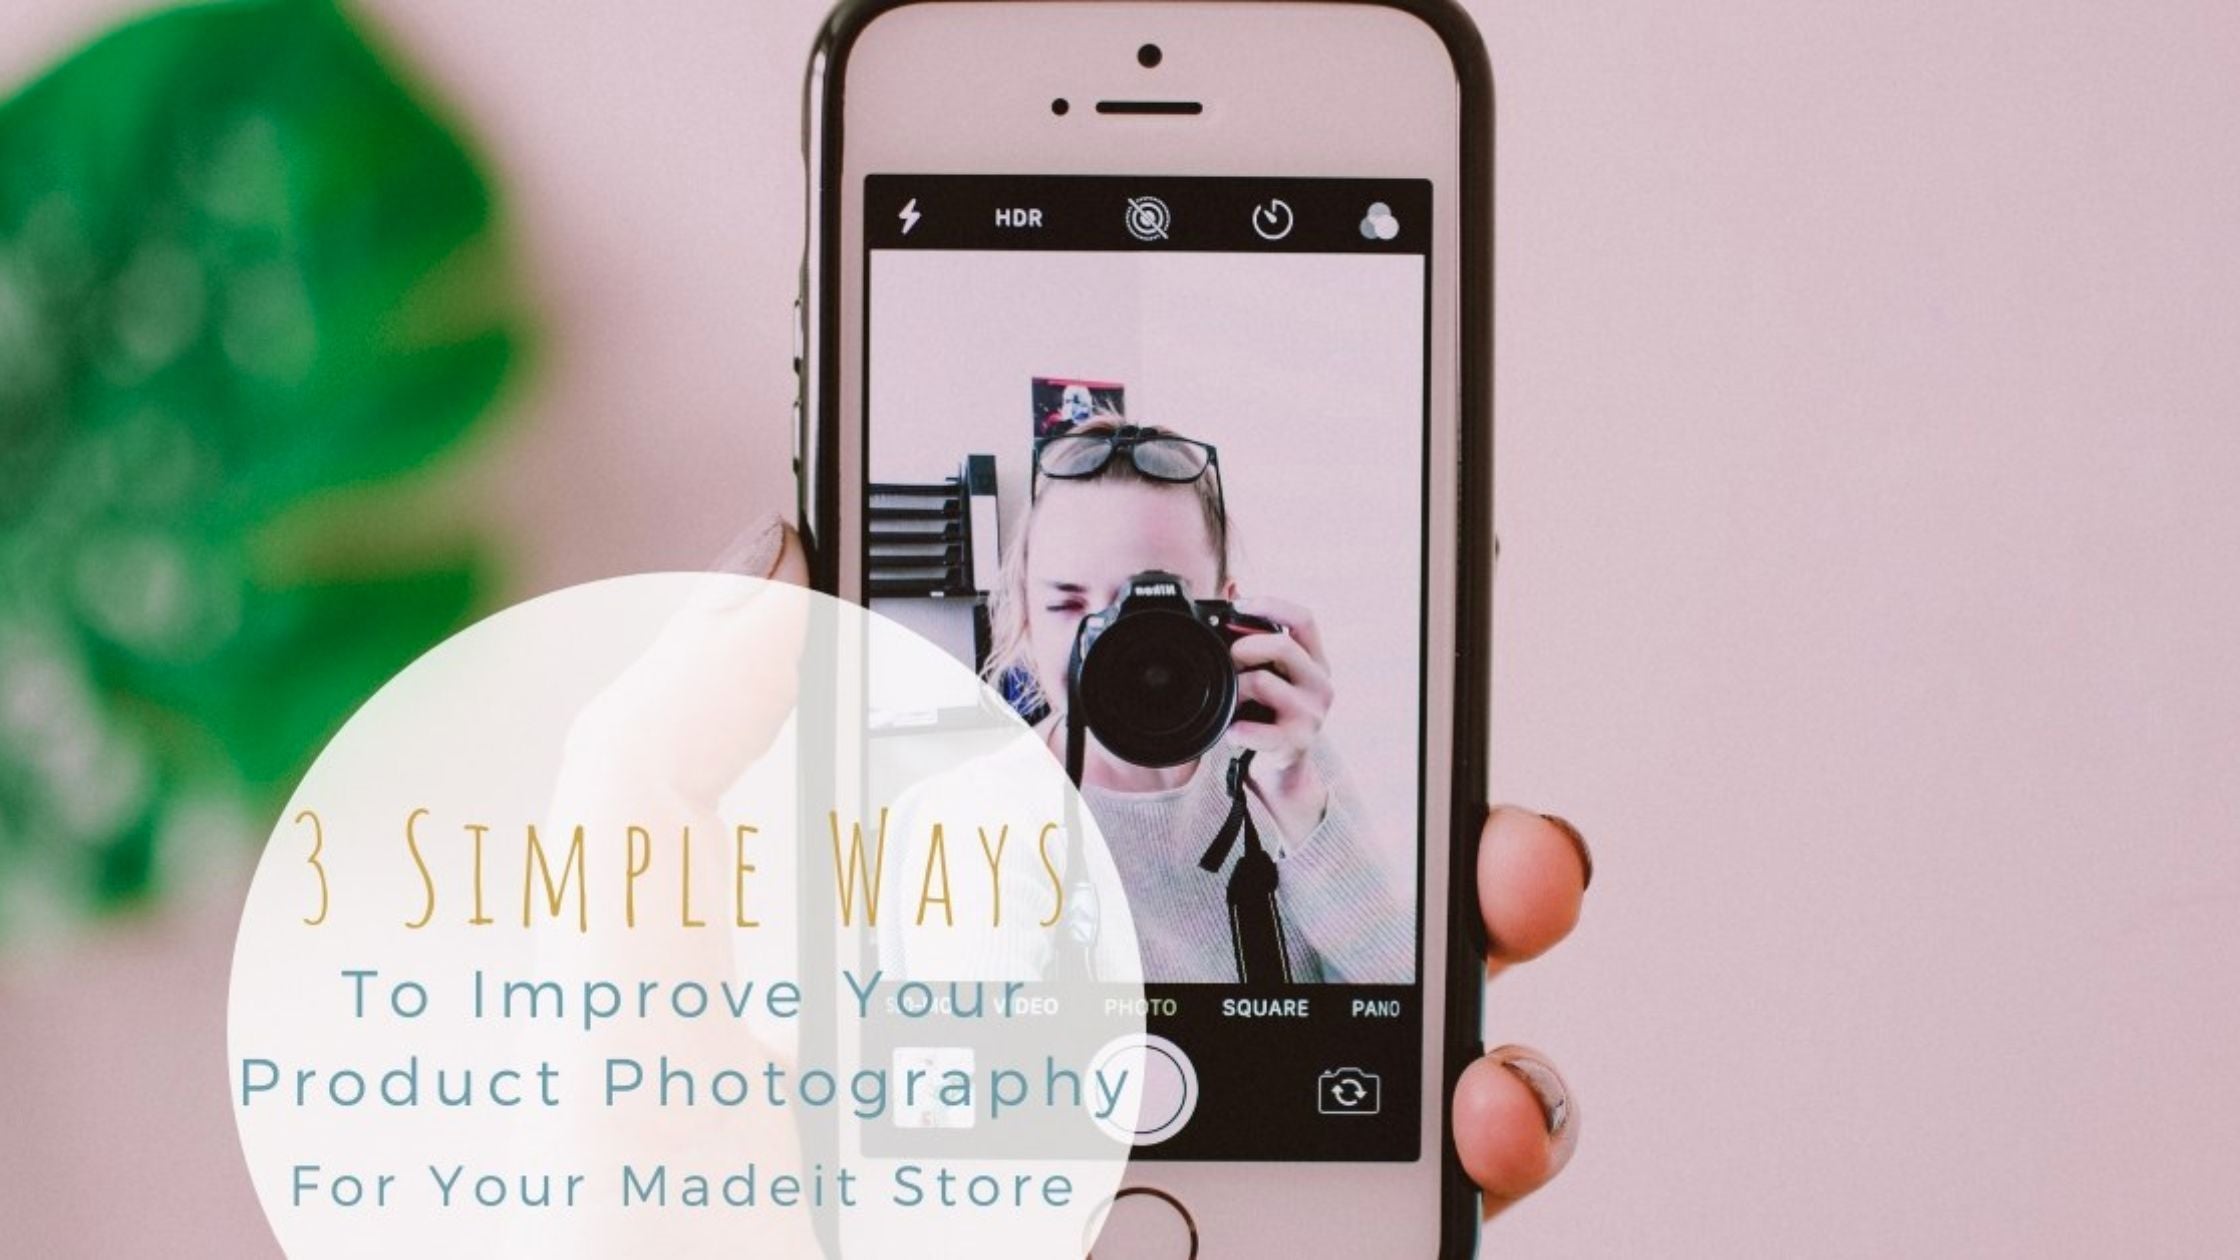 3 Simple Ways to Improve Your Product Photography for Your Madeit Store